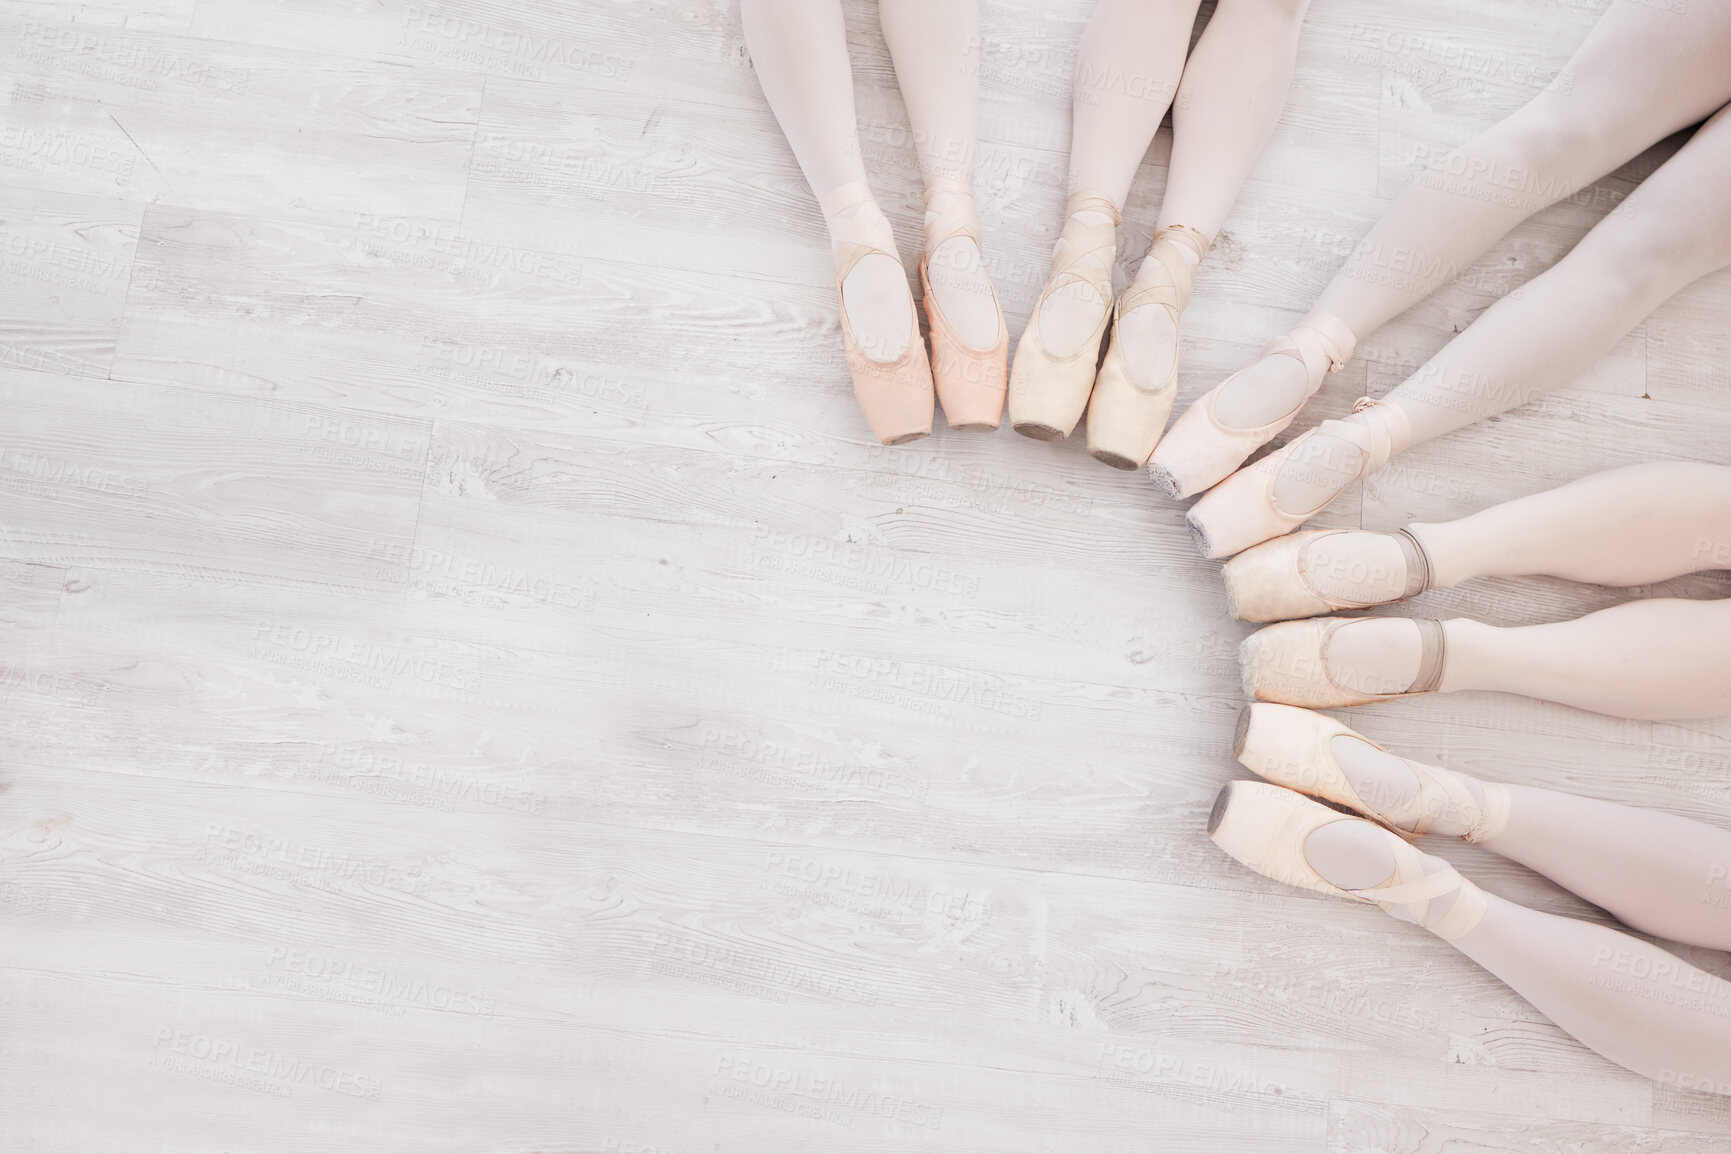 Buy stock photo Shot of a group of ballet pointe shoes